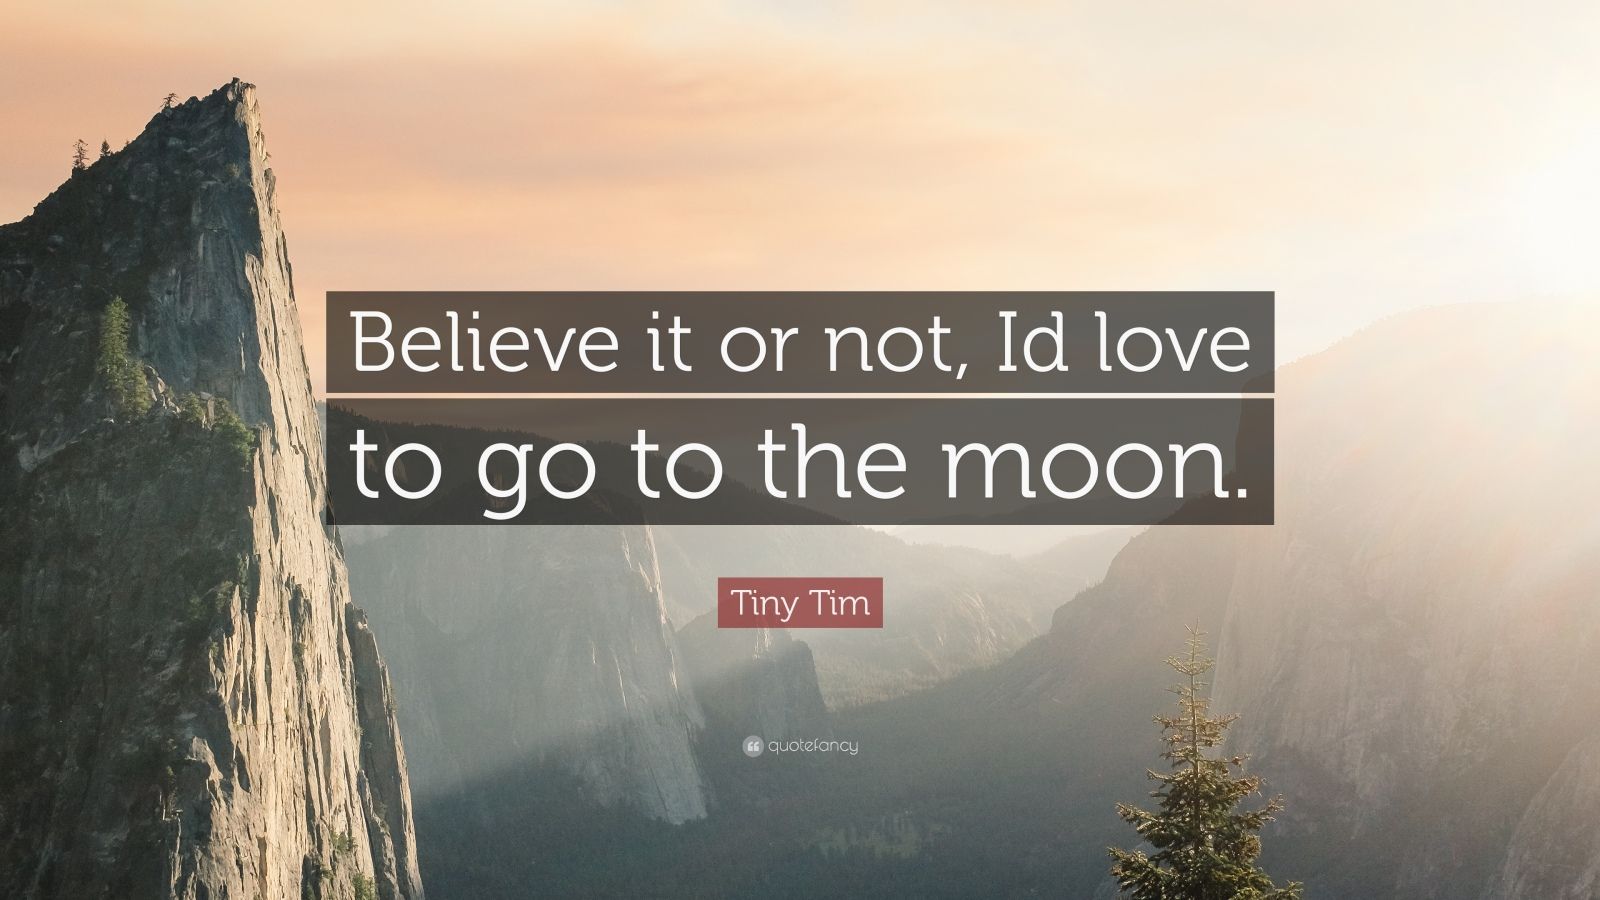 Top 8 Tiny Tim Quotes | 2021 Edition | Free Images - QuoteFancy